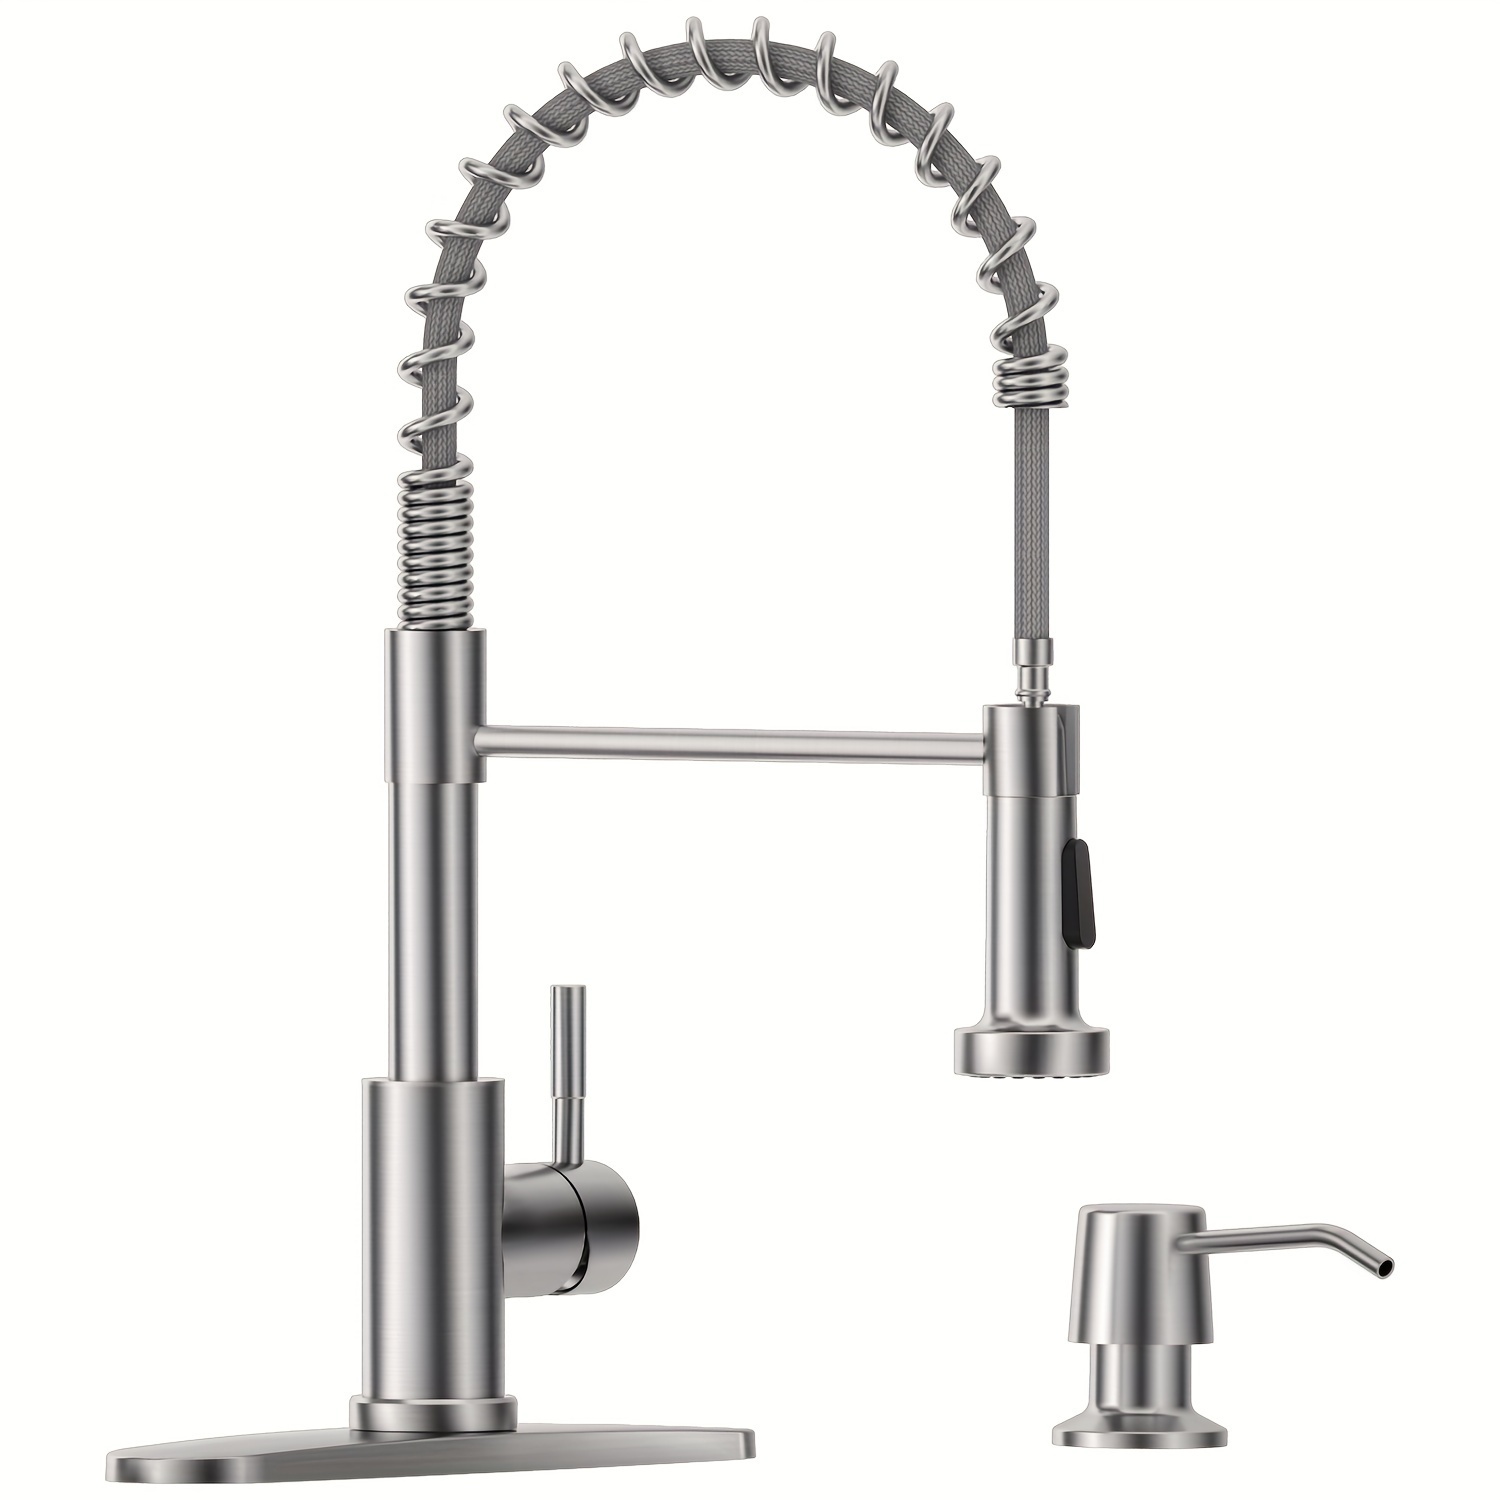 

Appaso Kitchen Faucet With Soap Dispenser Brushed Nickel, Pull Down Kitchen Faucet Commercial Single Handle High Arc Faucet For Sink, Stainless Steel Kitchen Faucet For Sink 2 Or 4 Hole